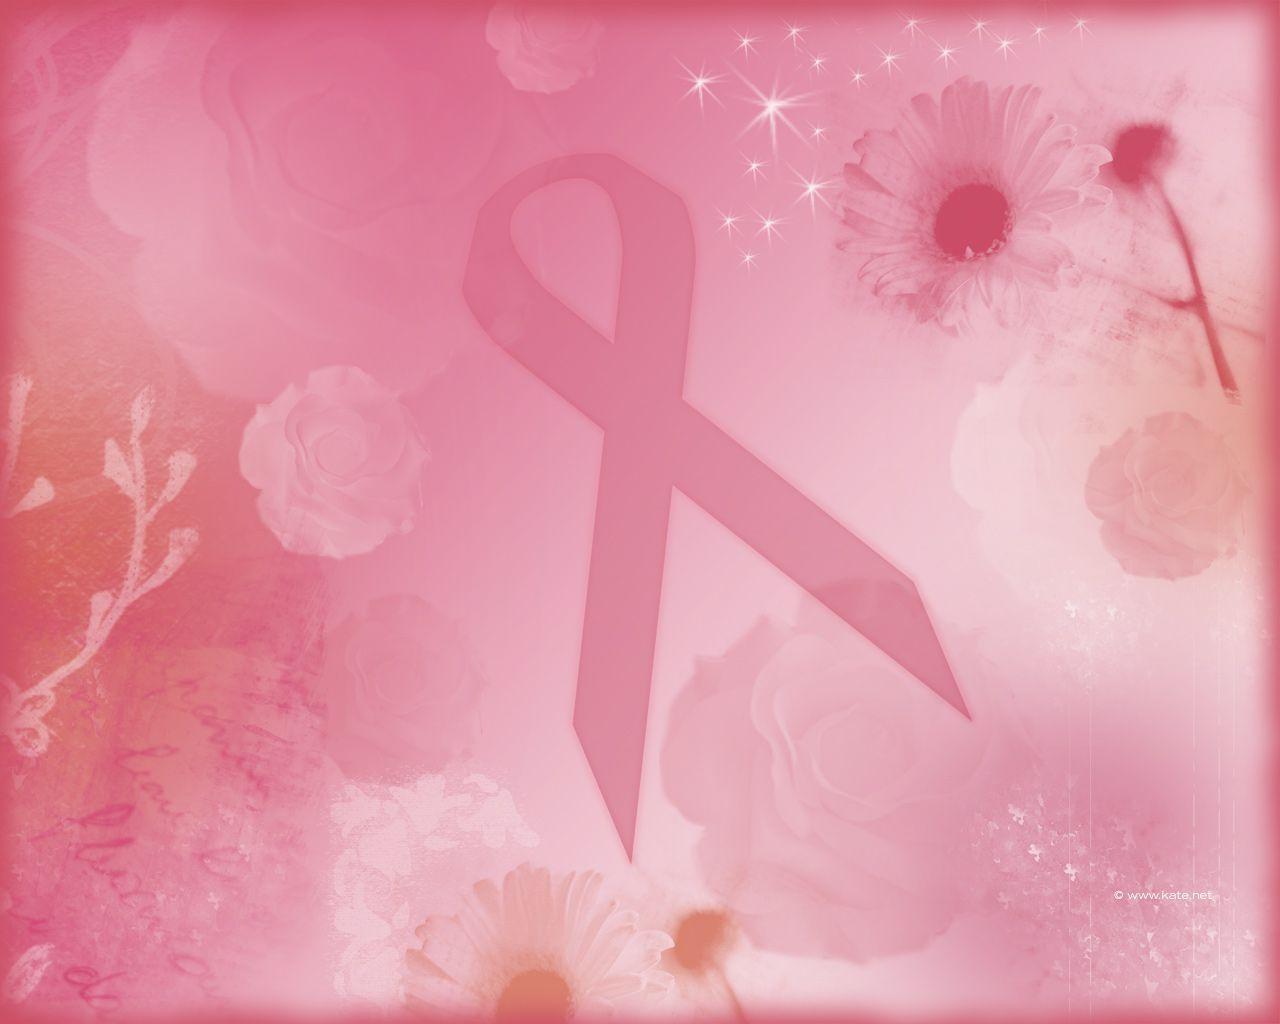 Breast Cancer Day Campaign Pink Ribbon Flowers Stock Photos  Free   RoyaltyFree Stock Photos from Dreamstime